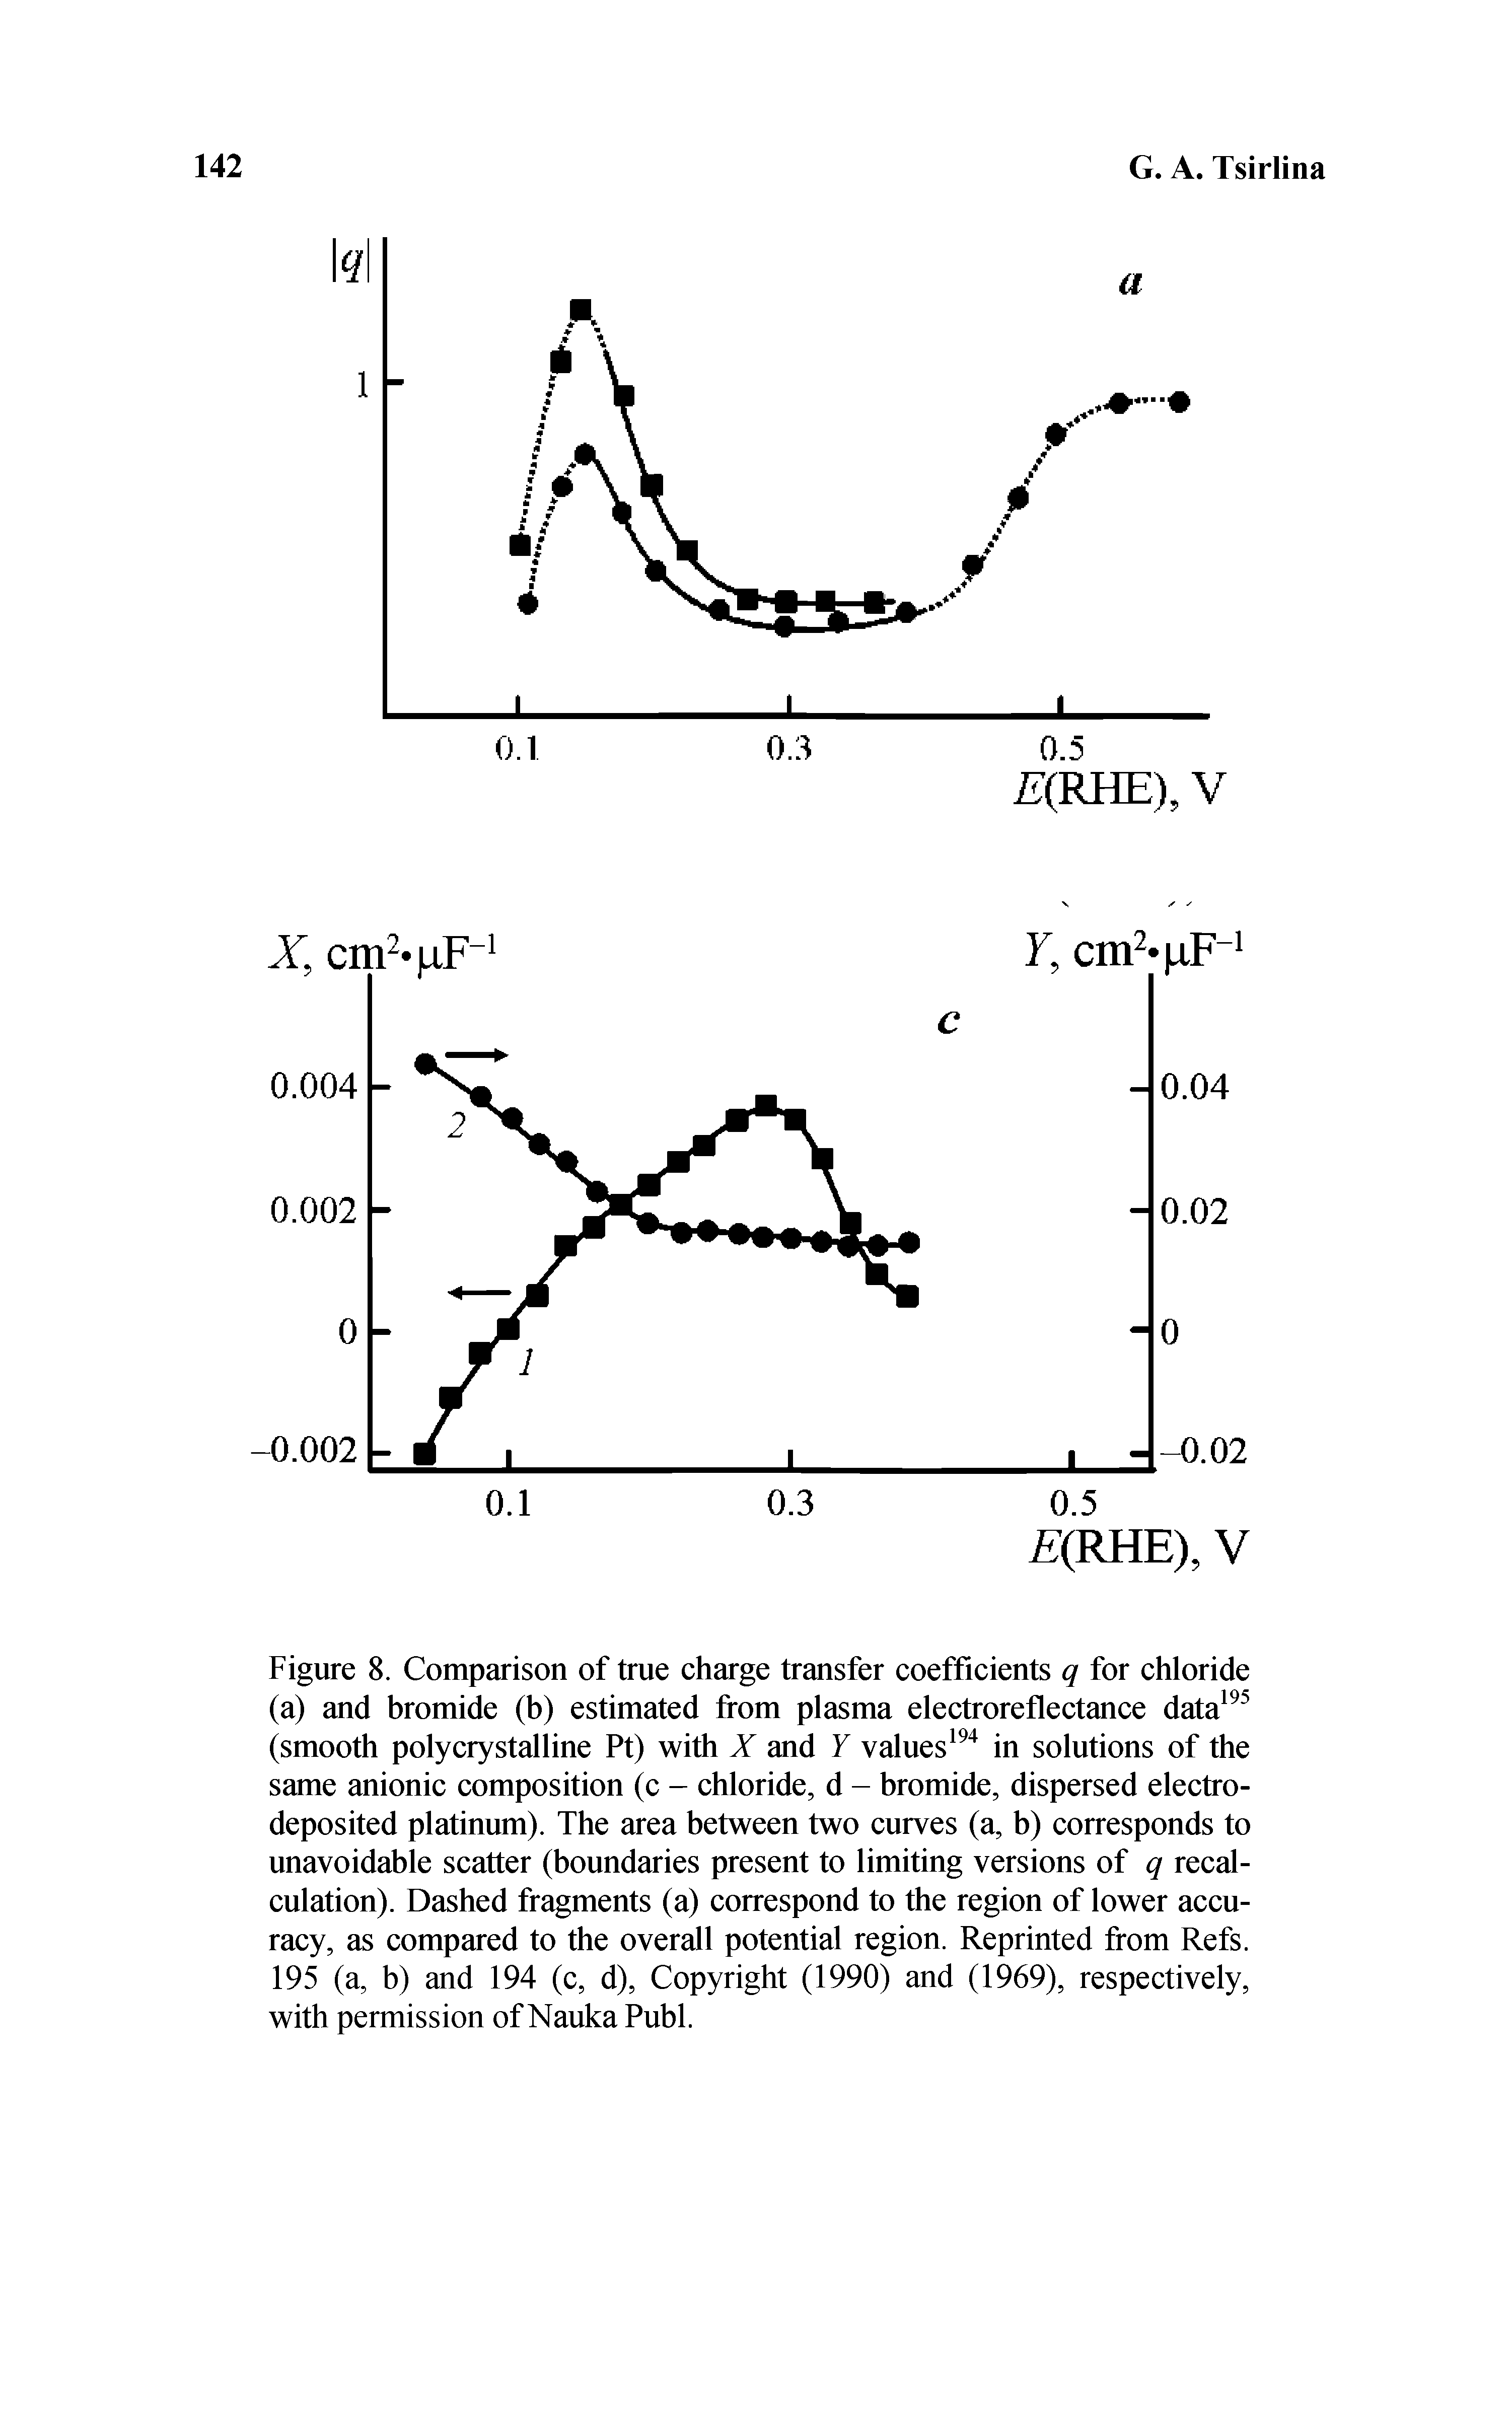 Figure 8. Comparison of true charge transfer coefficients q for chloride (a) and bromide (b) estimated from plasma electroreflectance data (smooth poly crystalline Pt) with X and Y values in solutions of the same anionic composition (c - chloride, d - bromide, dispersed electro-deposited platinum). The area between two curves (a, b) corresponds to unavoidable scatter (boundaries present to limiting versions of q recalculation). Dashed fragments (a) correspond to the region of lower accuracy, as compared to the overall potential region. Reprinted from Refs. 195 (a, b) and 194 (c, d). Copyright (1990) and (1969), respectively, with permission of Nauka Publ.